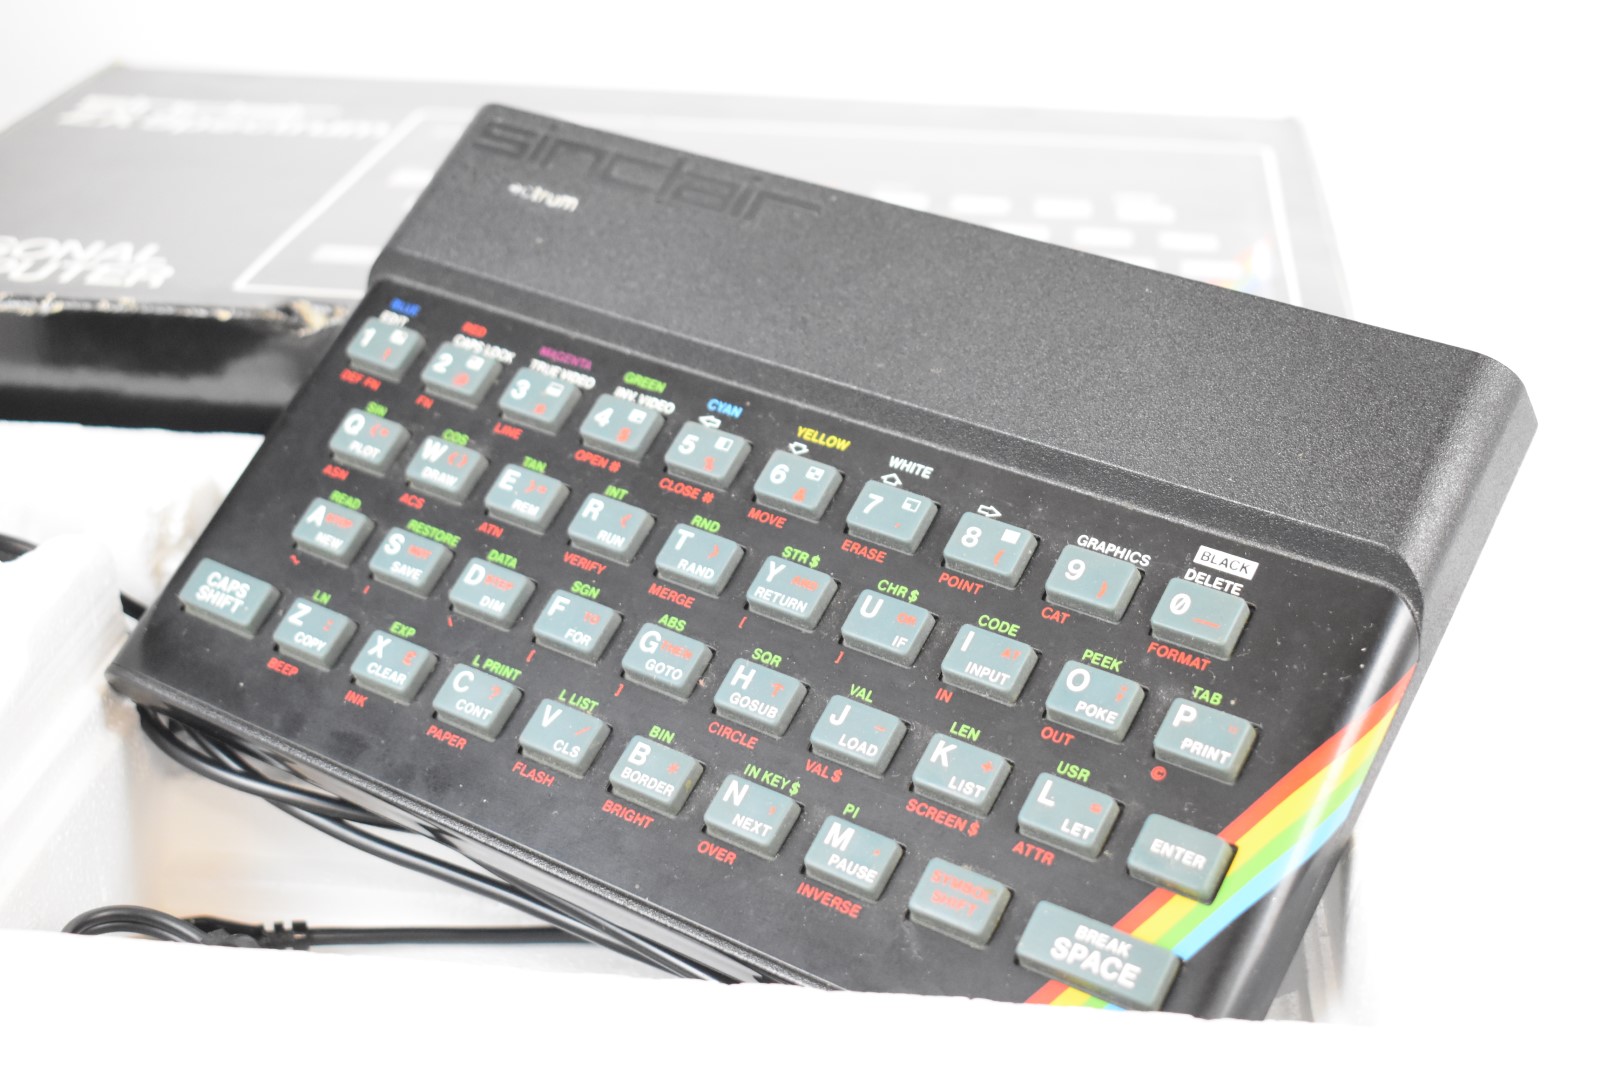 Sinclair ZX Spectrum 48K personal computer with power supply, in original box. - Image 2 of 5